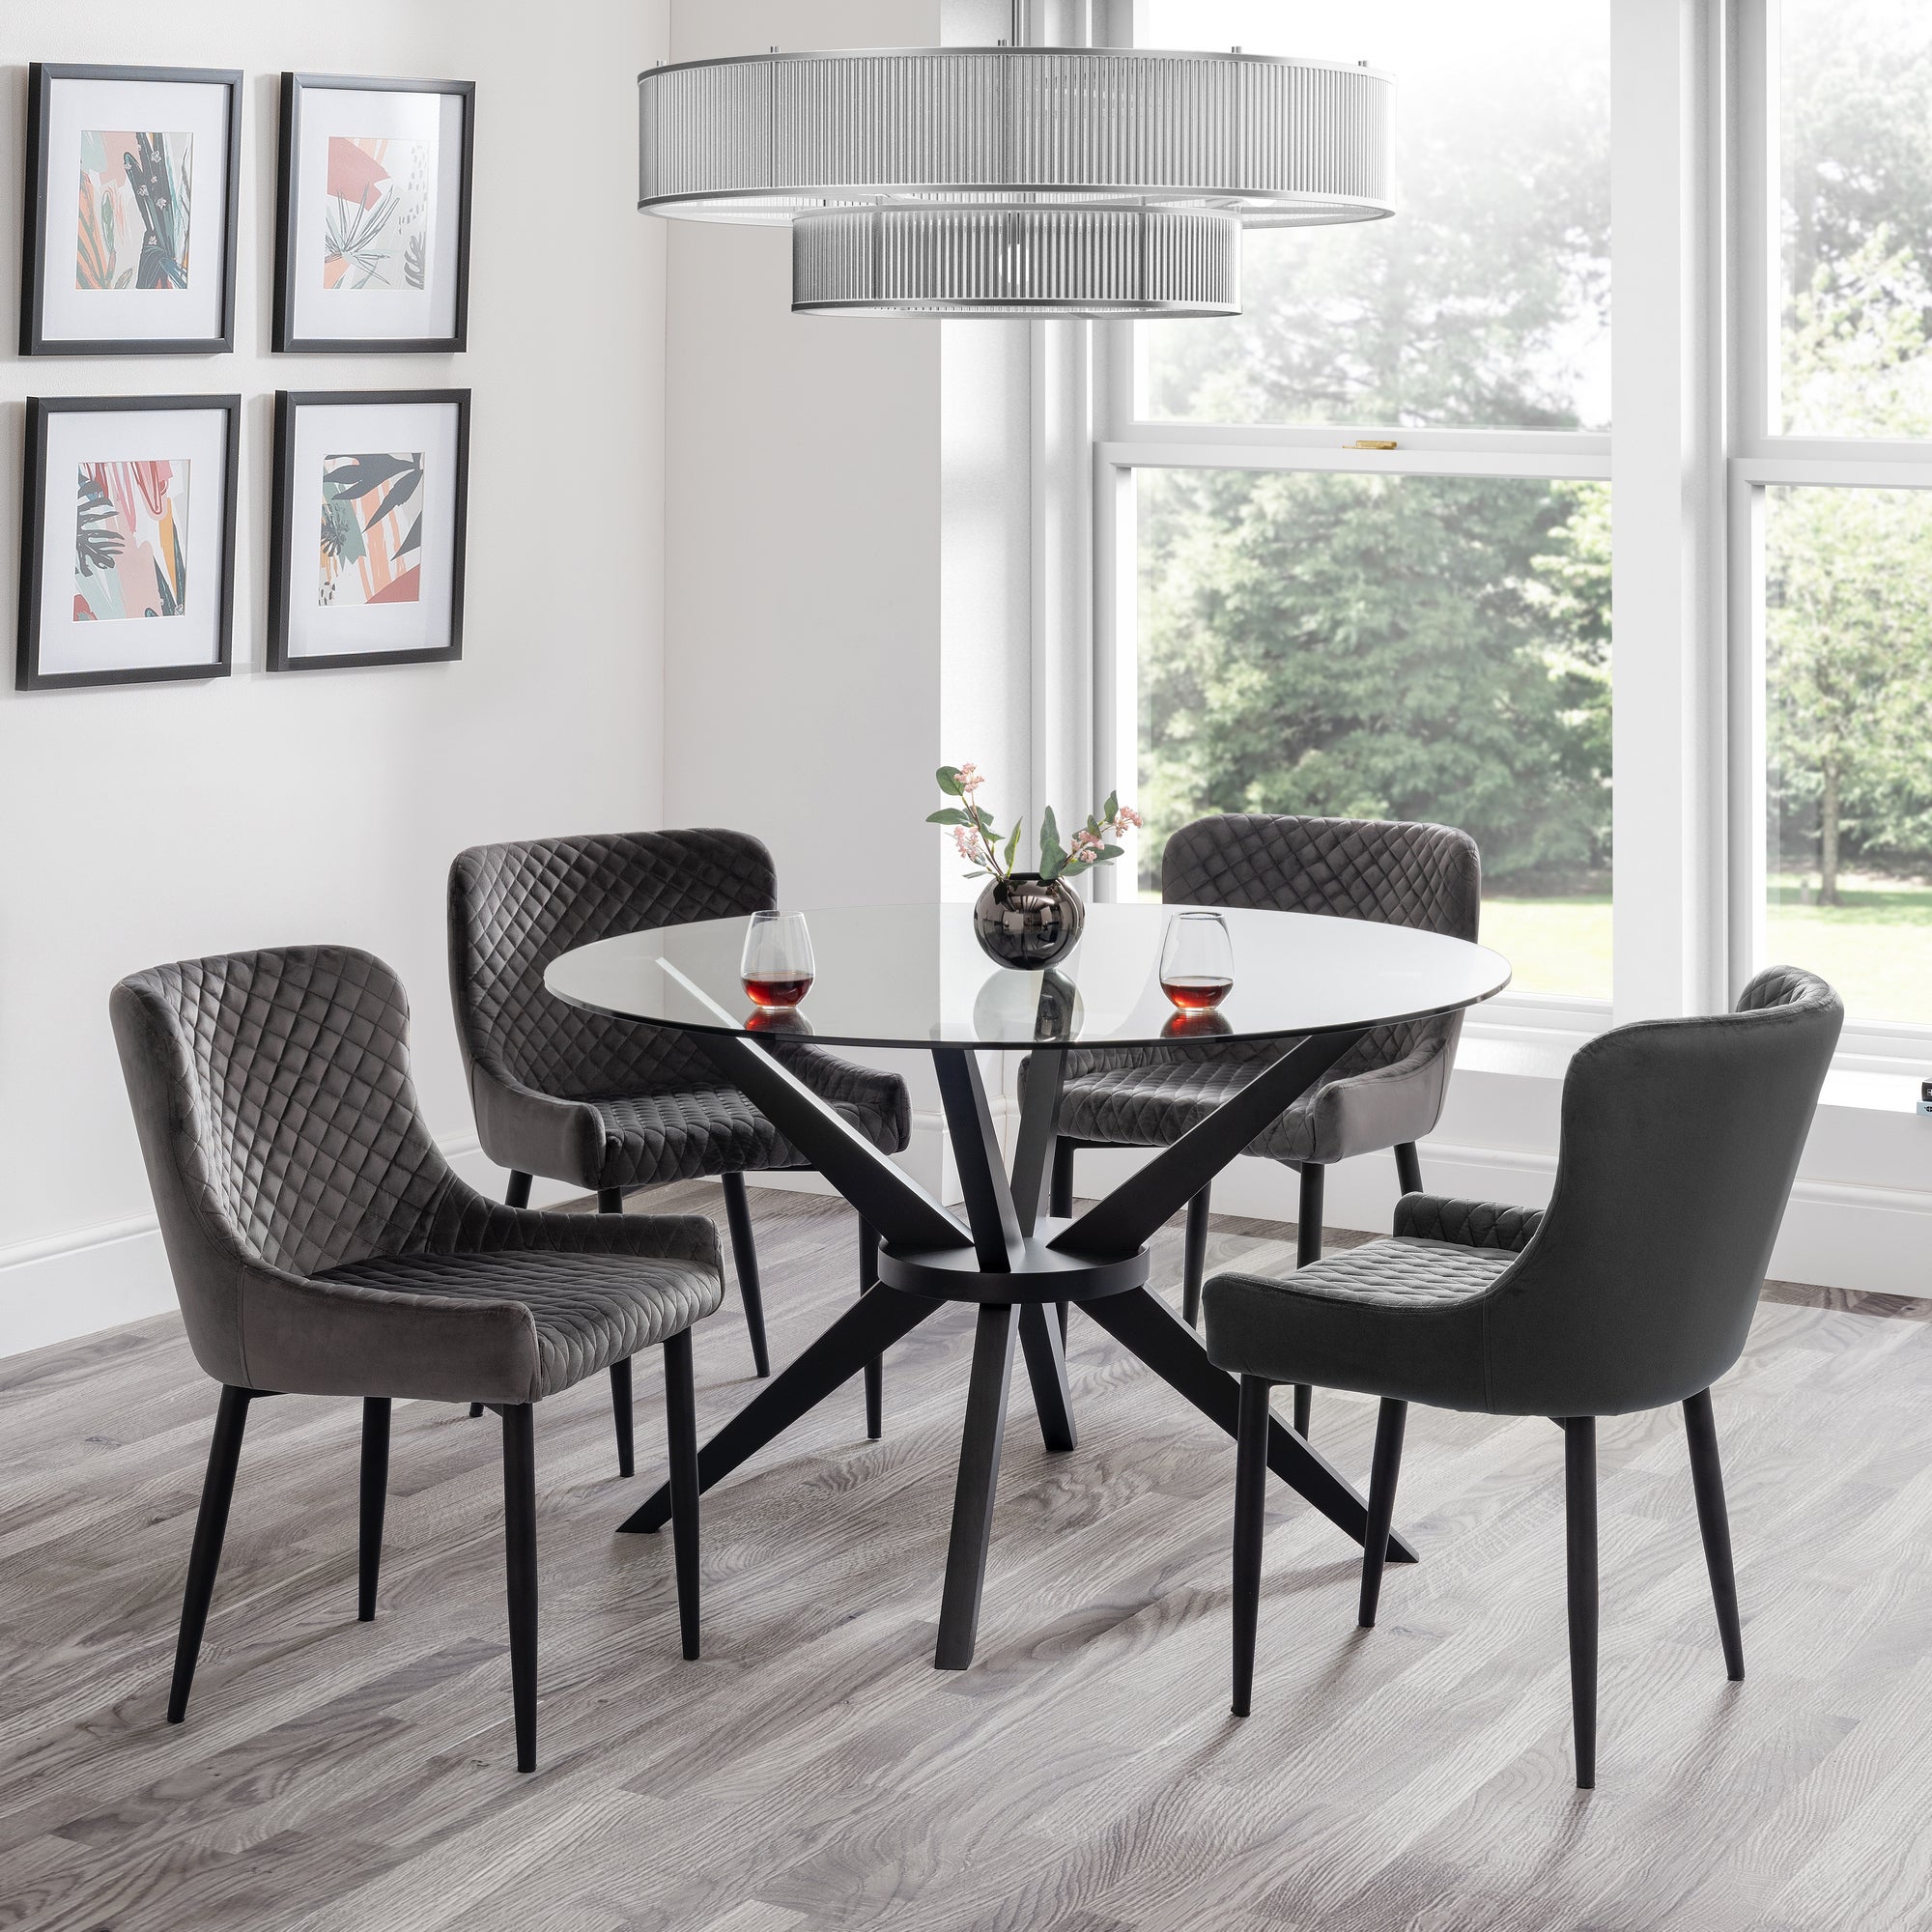 Hayden 4 Seater Round Dining Table Glass Clearblack